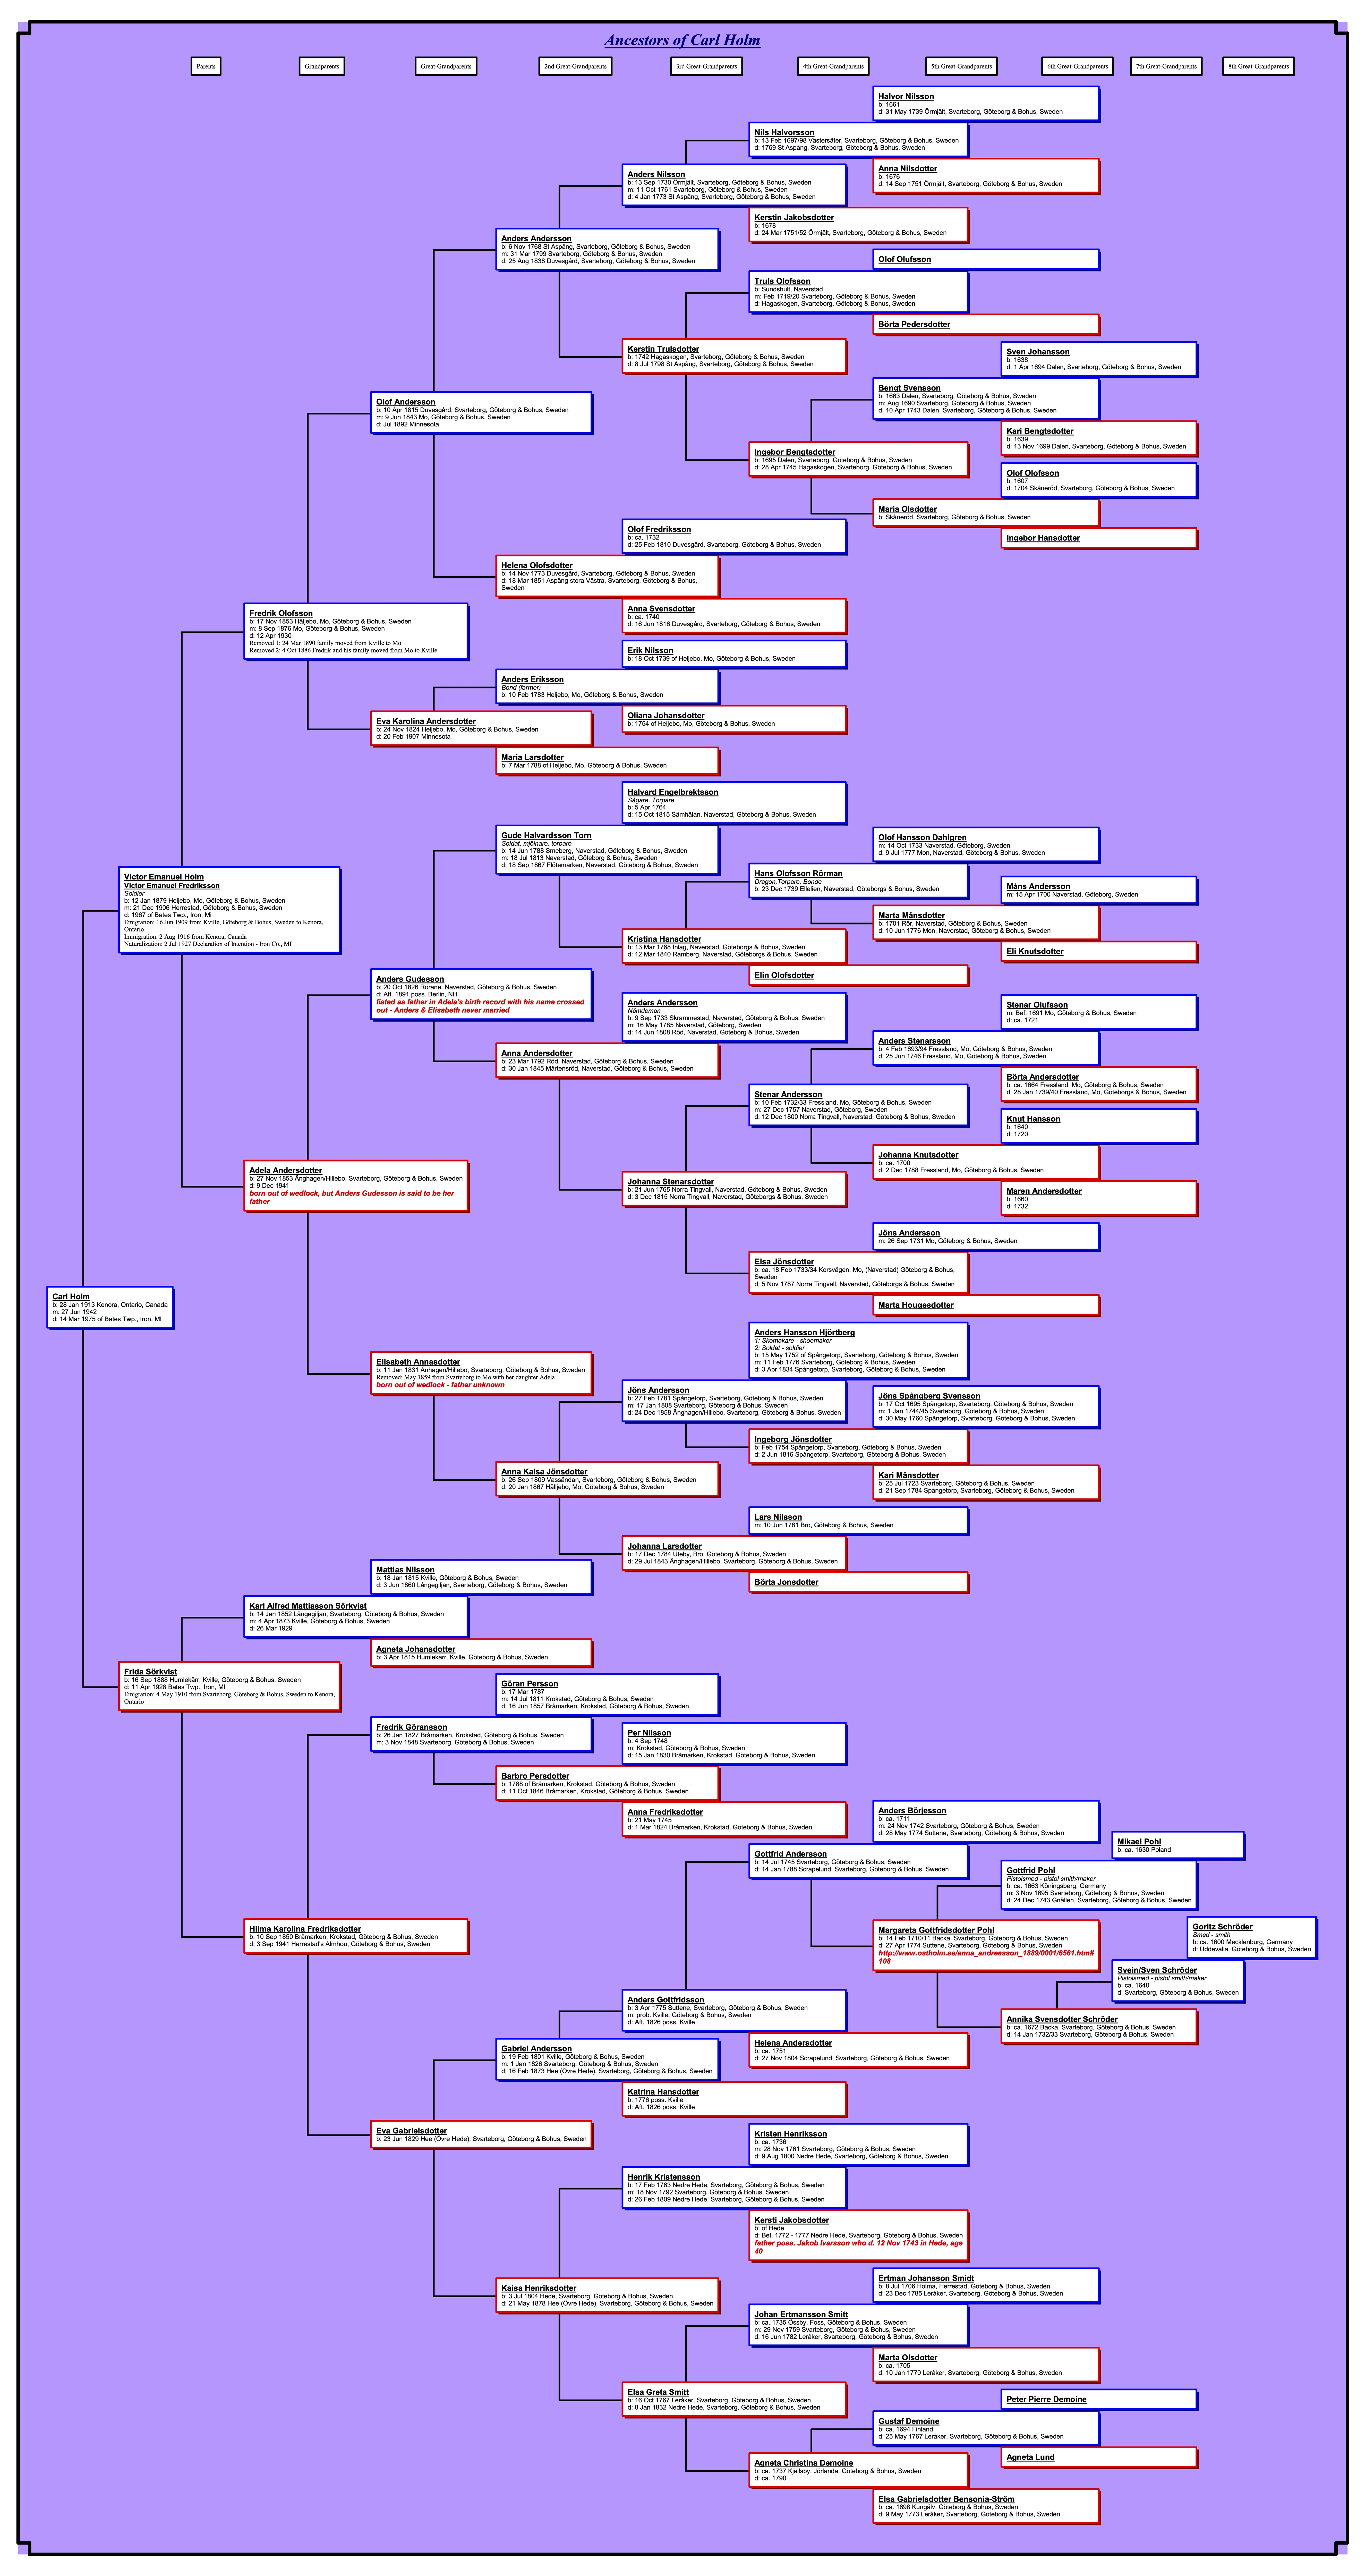 A pedigree chart showing eight generations of family members on a purple backgound